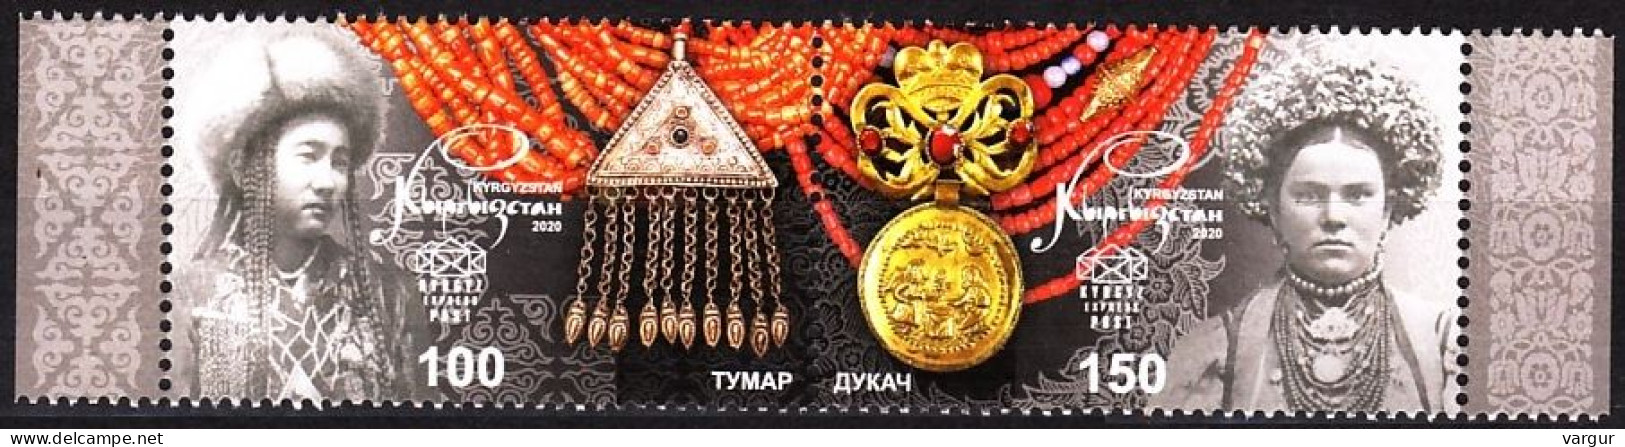 KYRGYZSTAN 2020 Folklore: Traditional Jewelry. Joint With Ukraine. Pair, MNH - Emissioni Congiunte